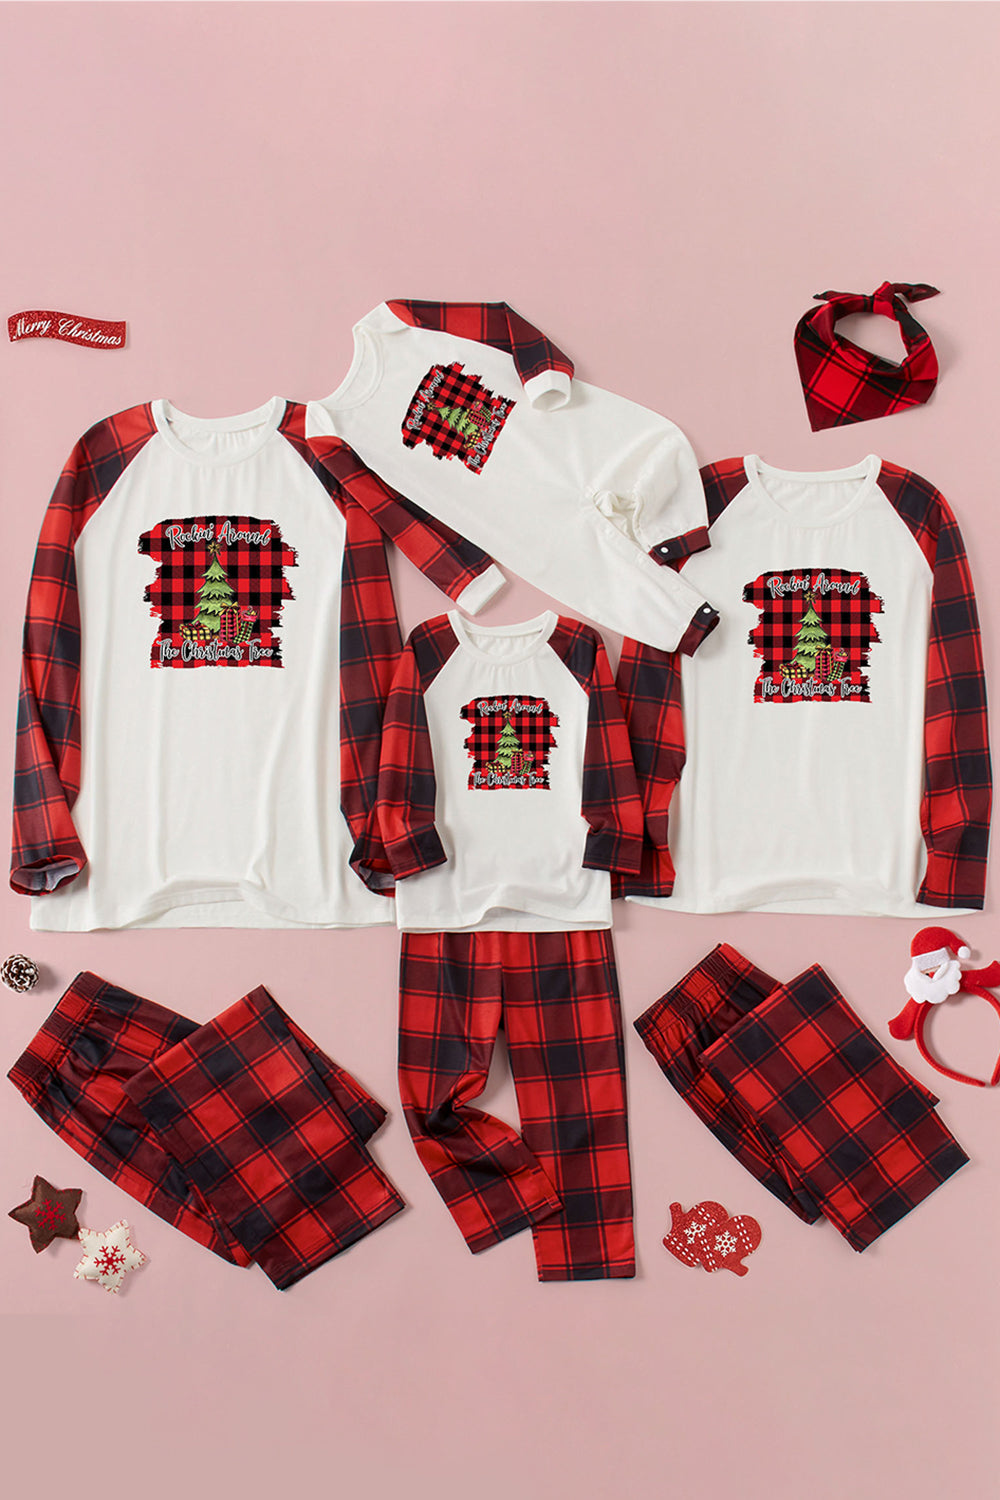 Graphic Top and Plaid Pants Set - Tophatter Deals and Online Shopping - Electronics, Jewelry, Beauty, Health, Gadgets, Fashion - Tophatter's Discounts & Offers - tophatters